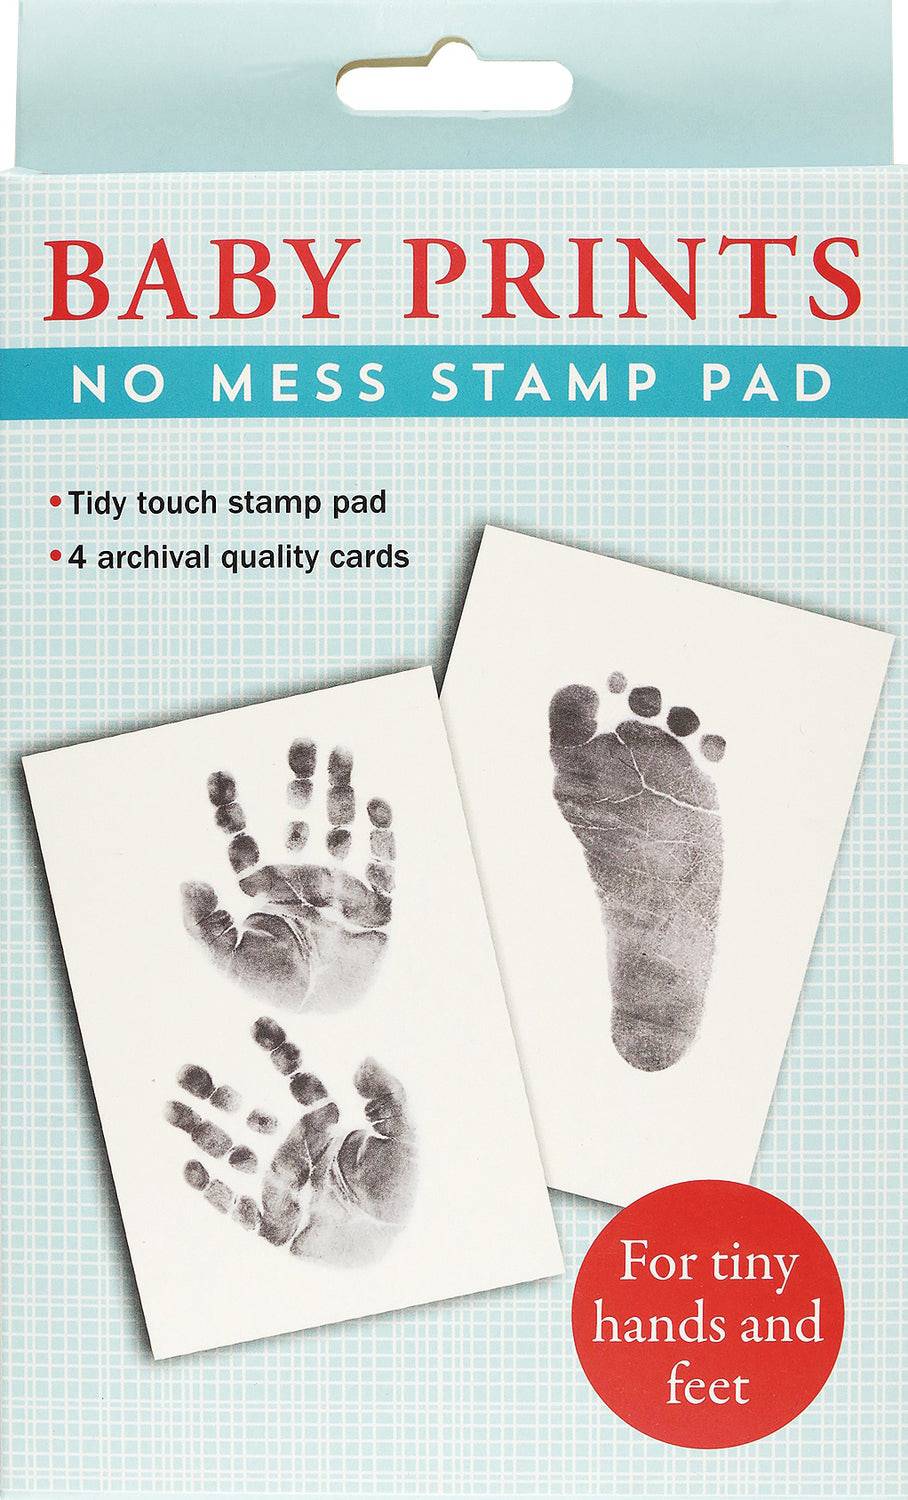 Baby Prints Stamp Pad - A Child's Delight